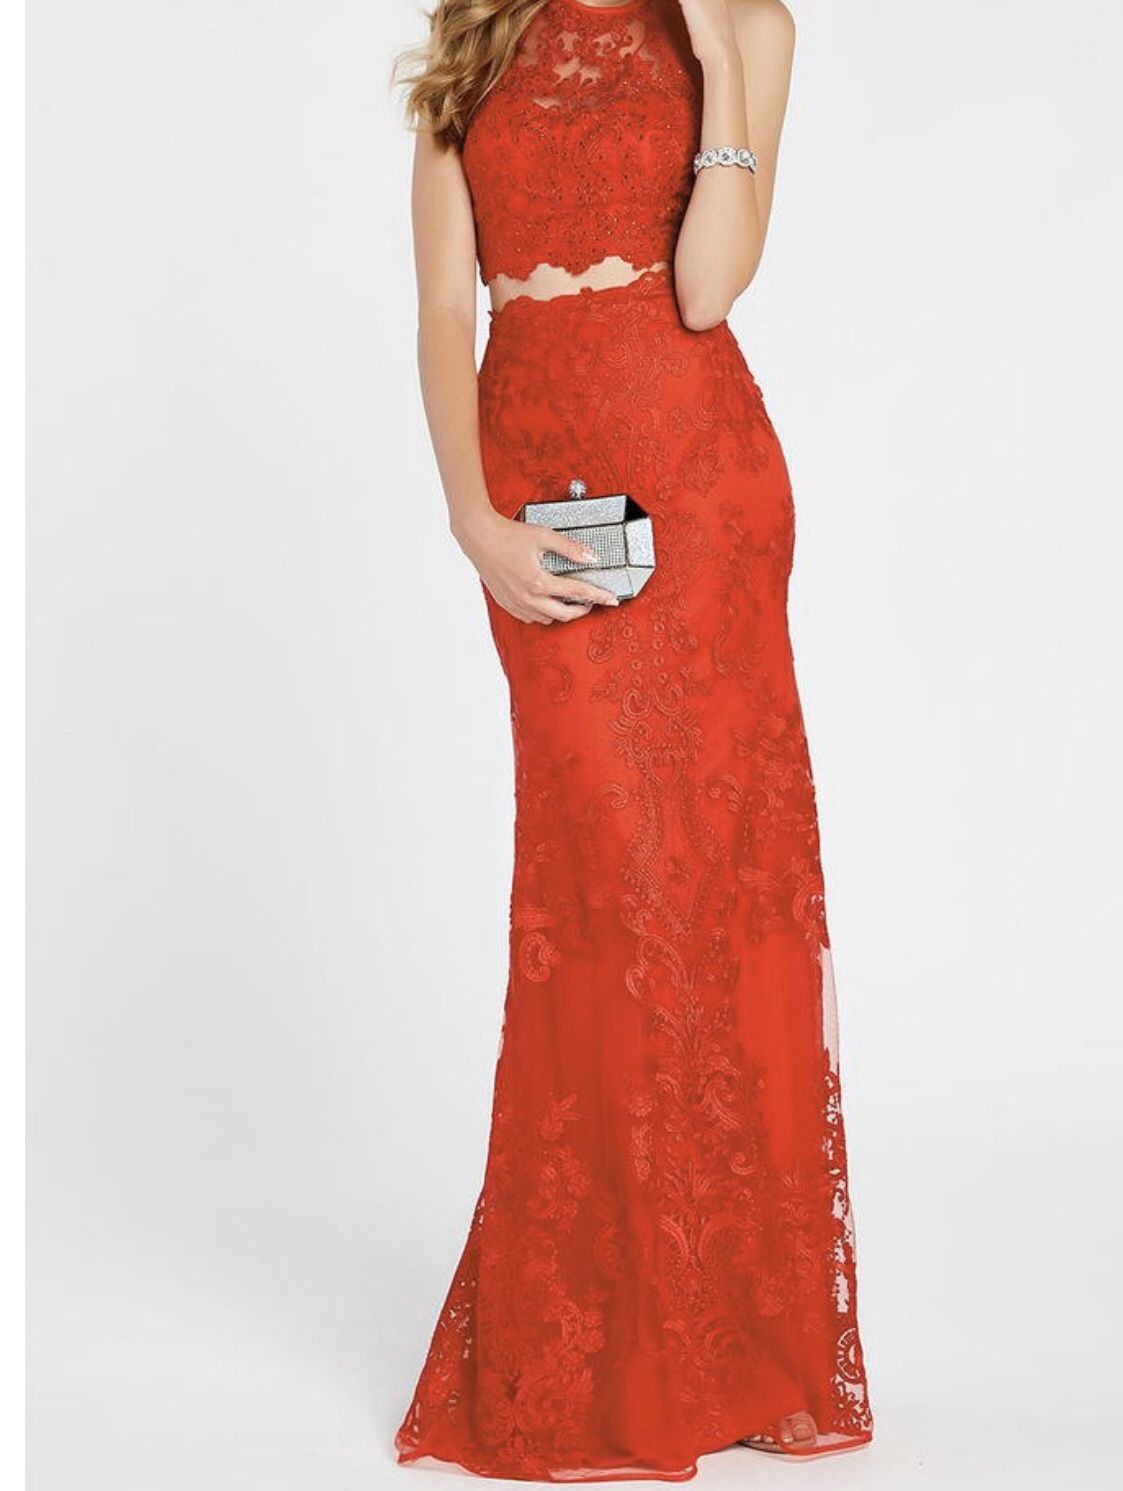 Alyce Paris Style 60487, Size 4, red. Brand New!